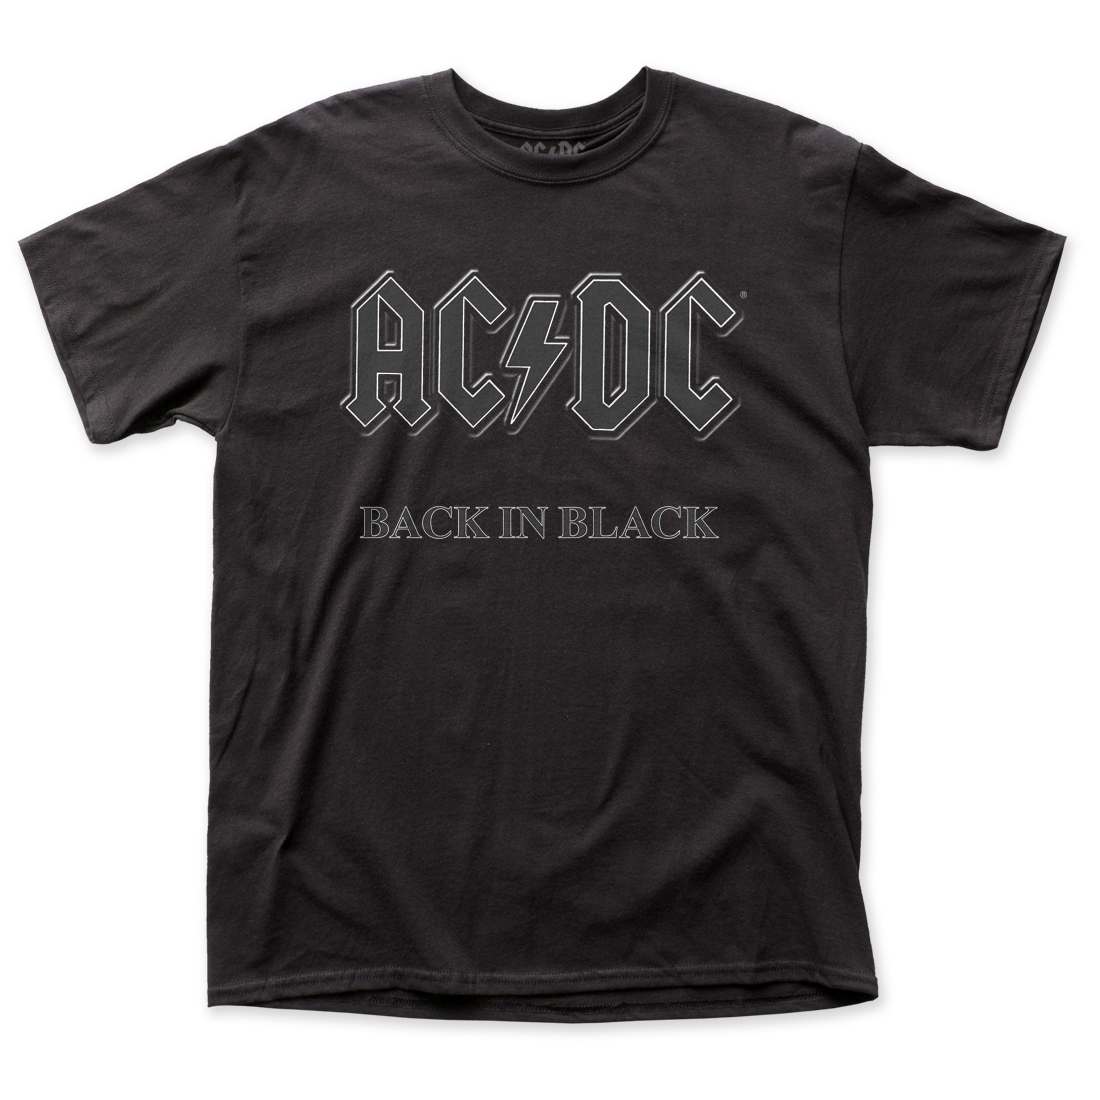 ACDC Back in Black T-Shirt